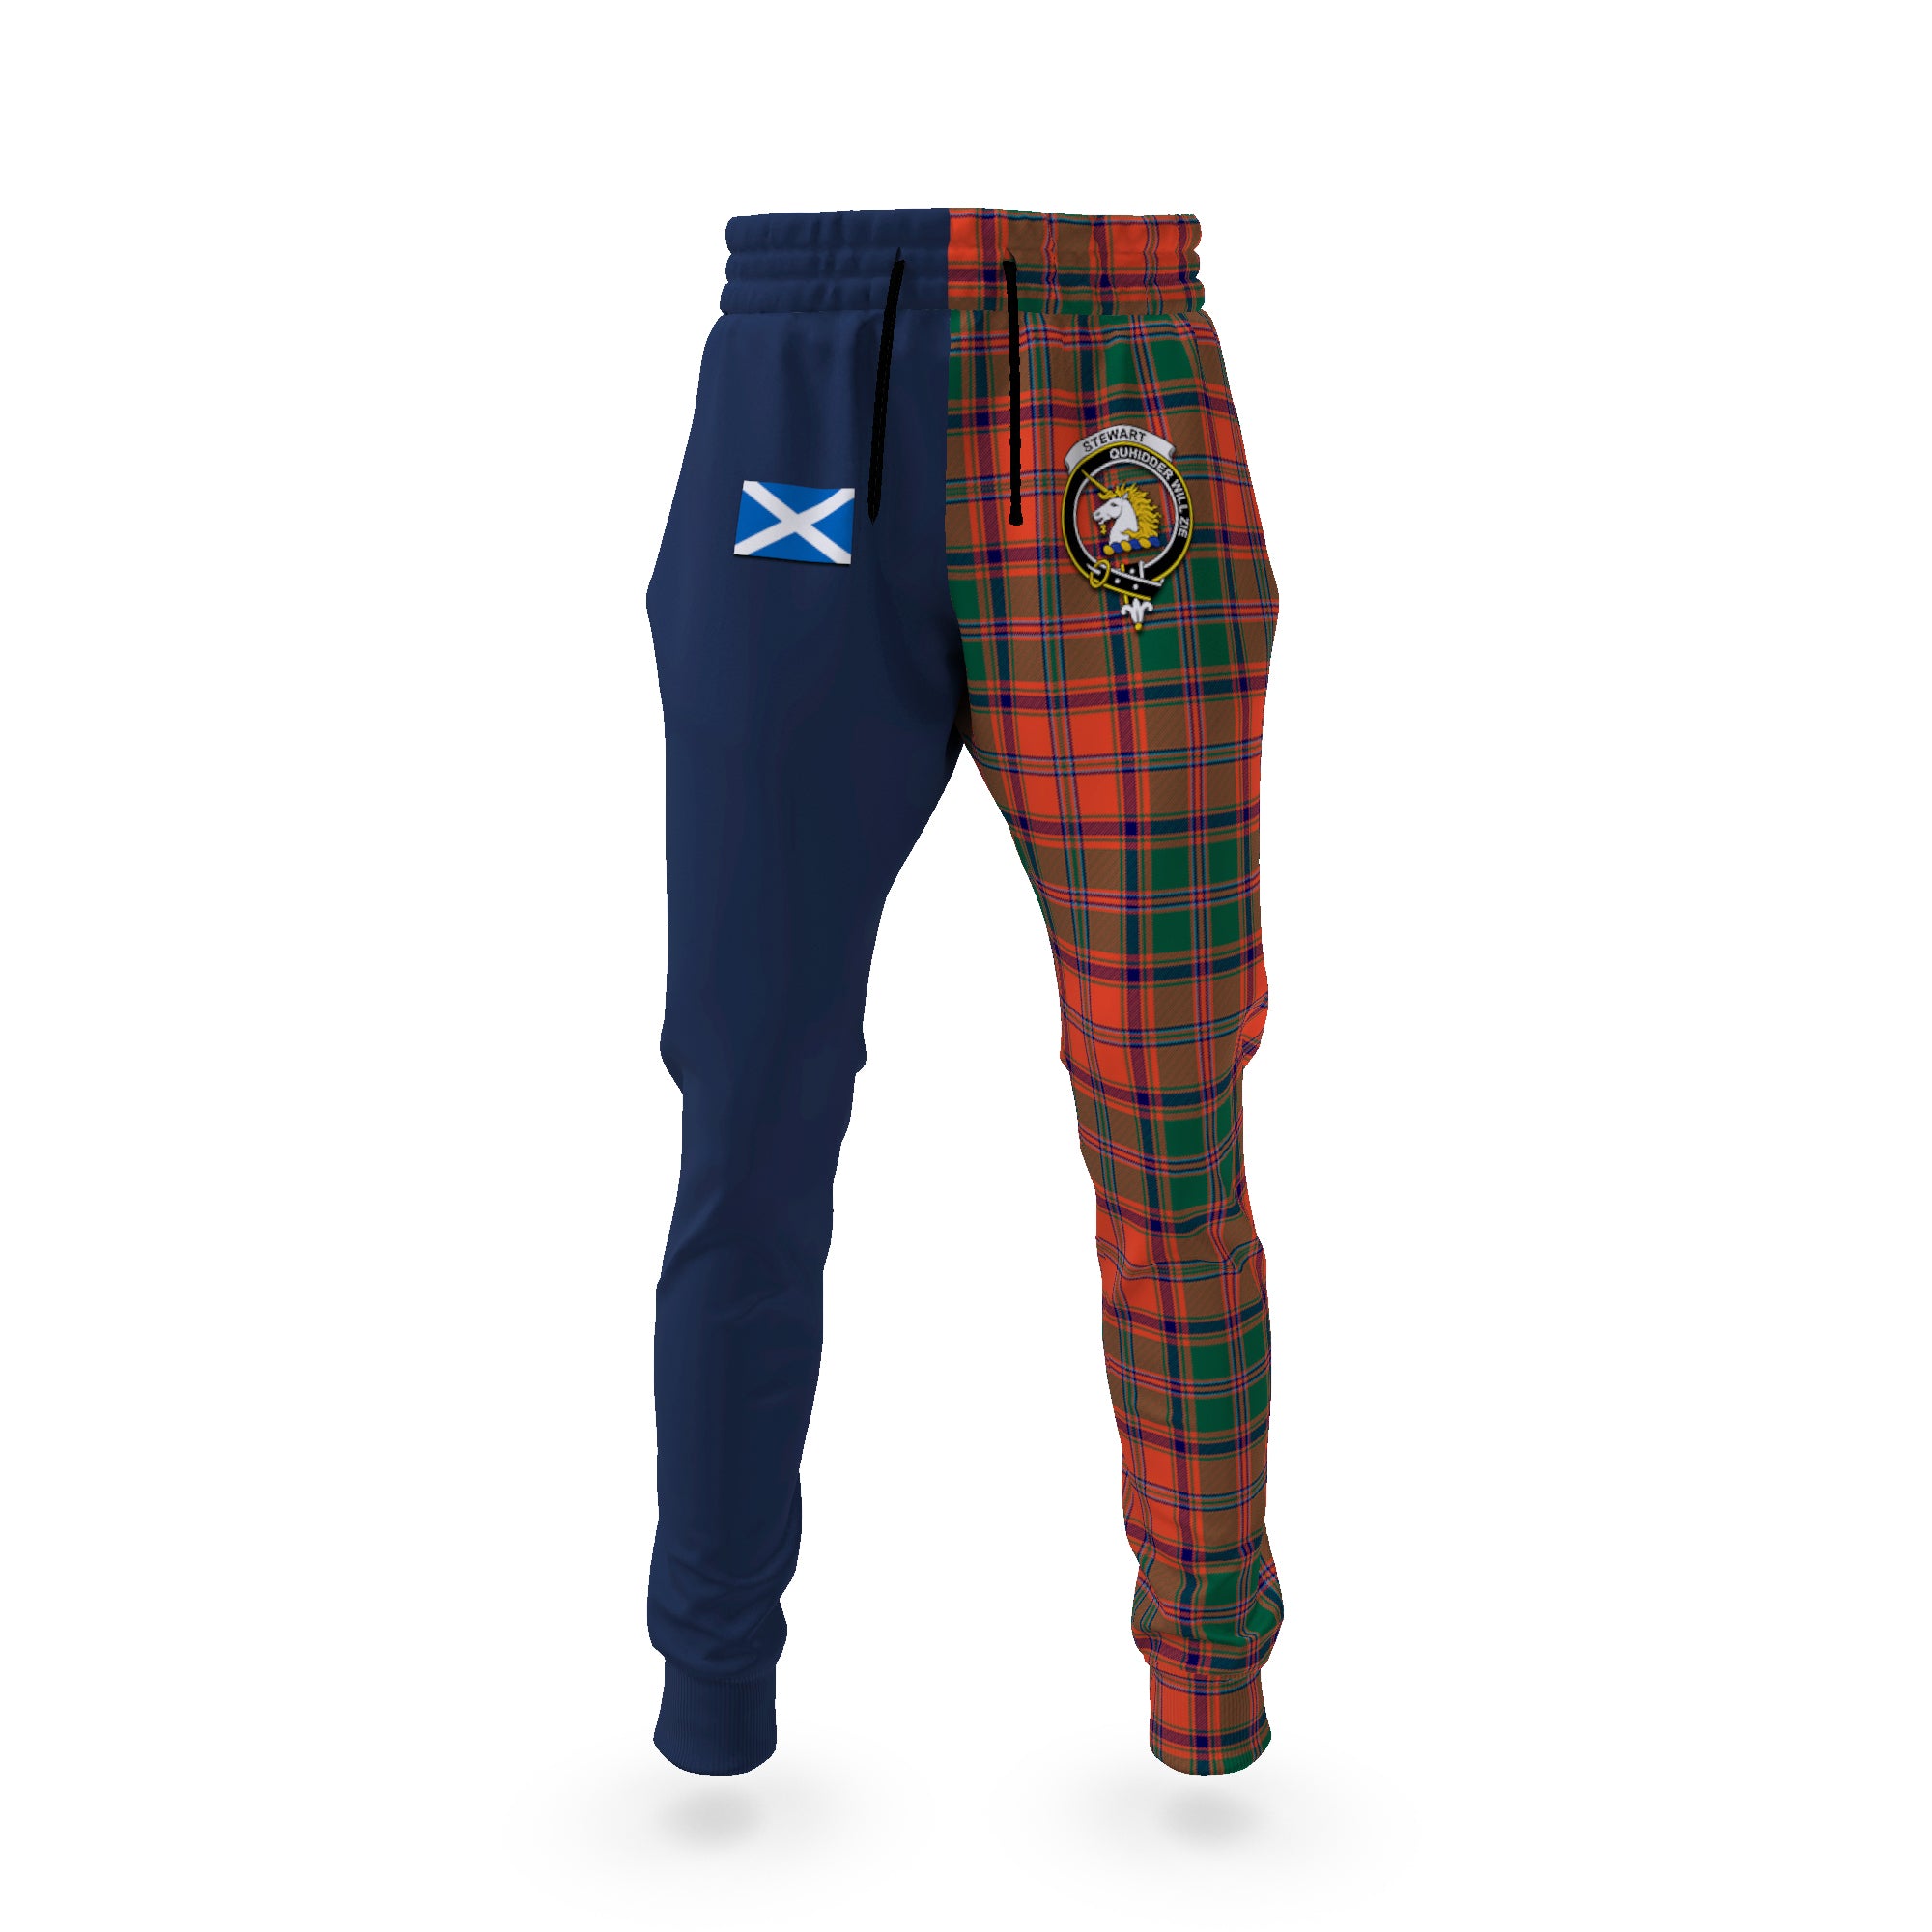 stewart-of-appin-ancient-tartan-plaid-joggers-family-crest-tartan-joggers-with-scottish-flag-half-style